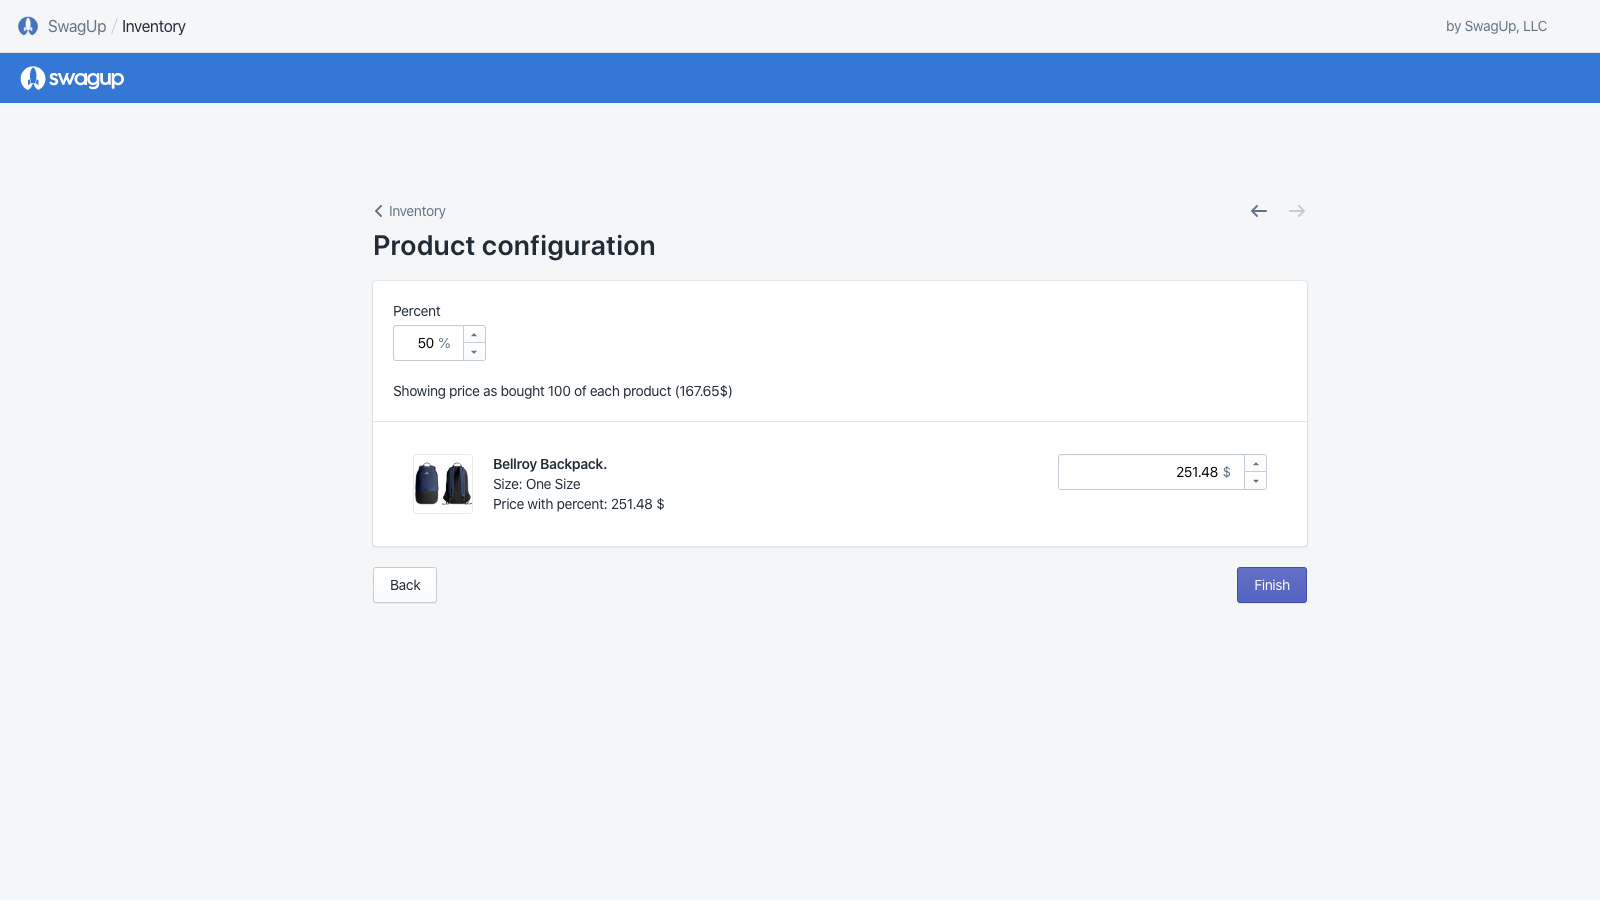 SwagUp - Shopify App Product Confirmation Page